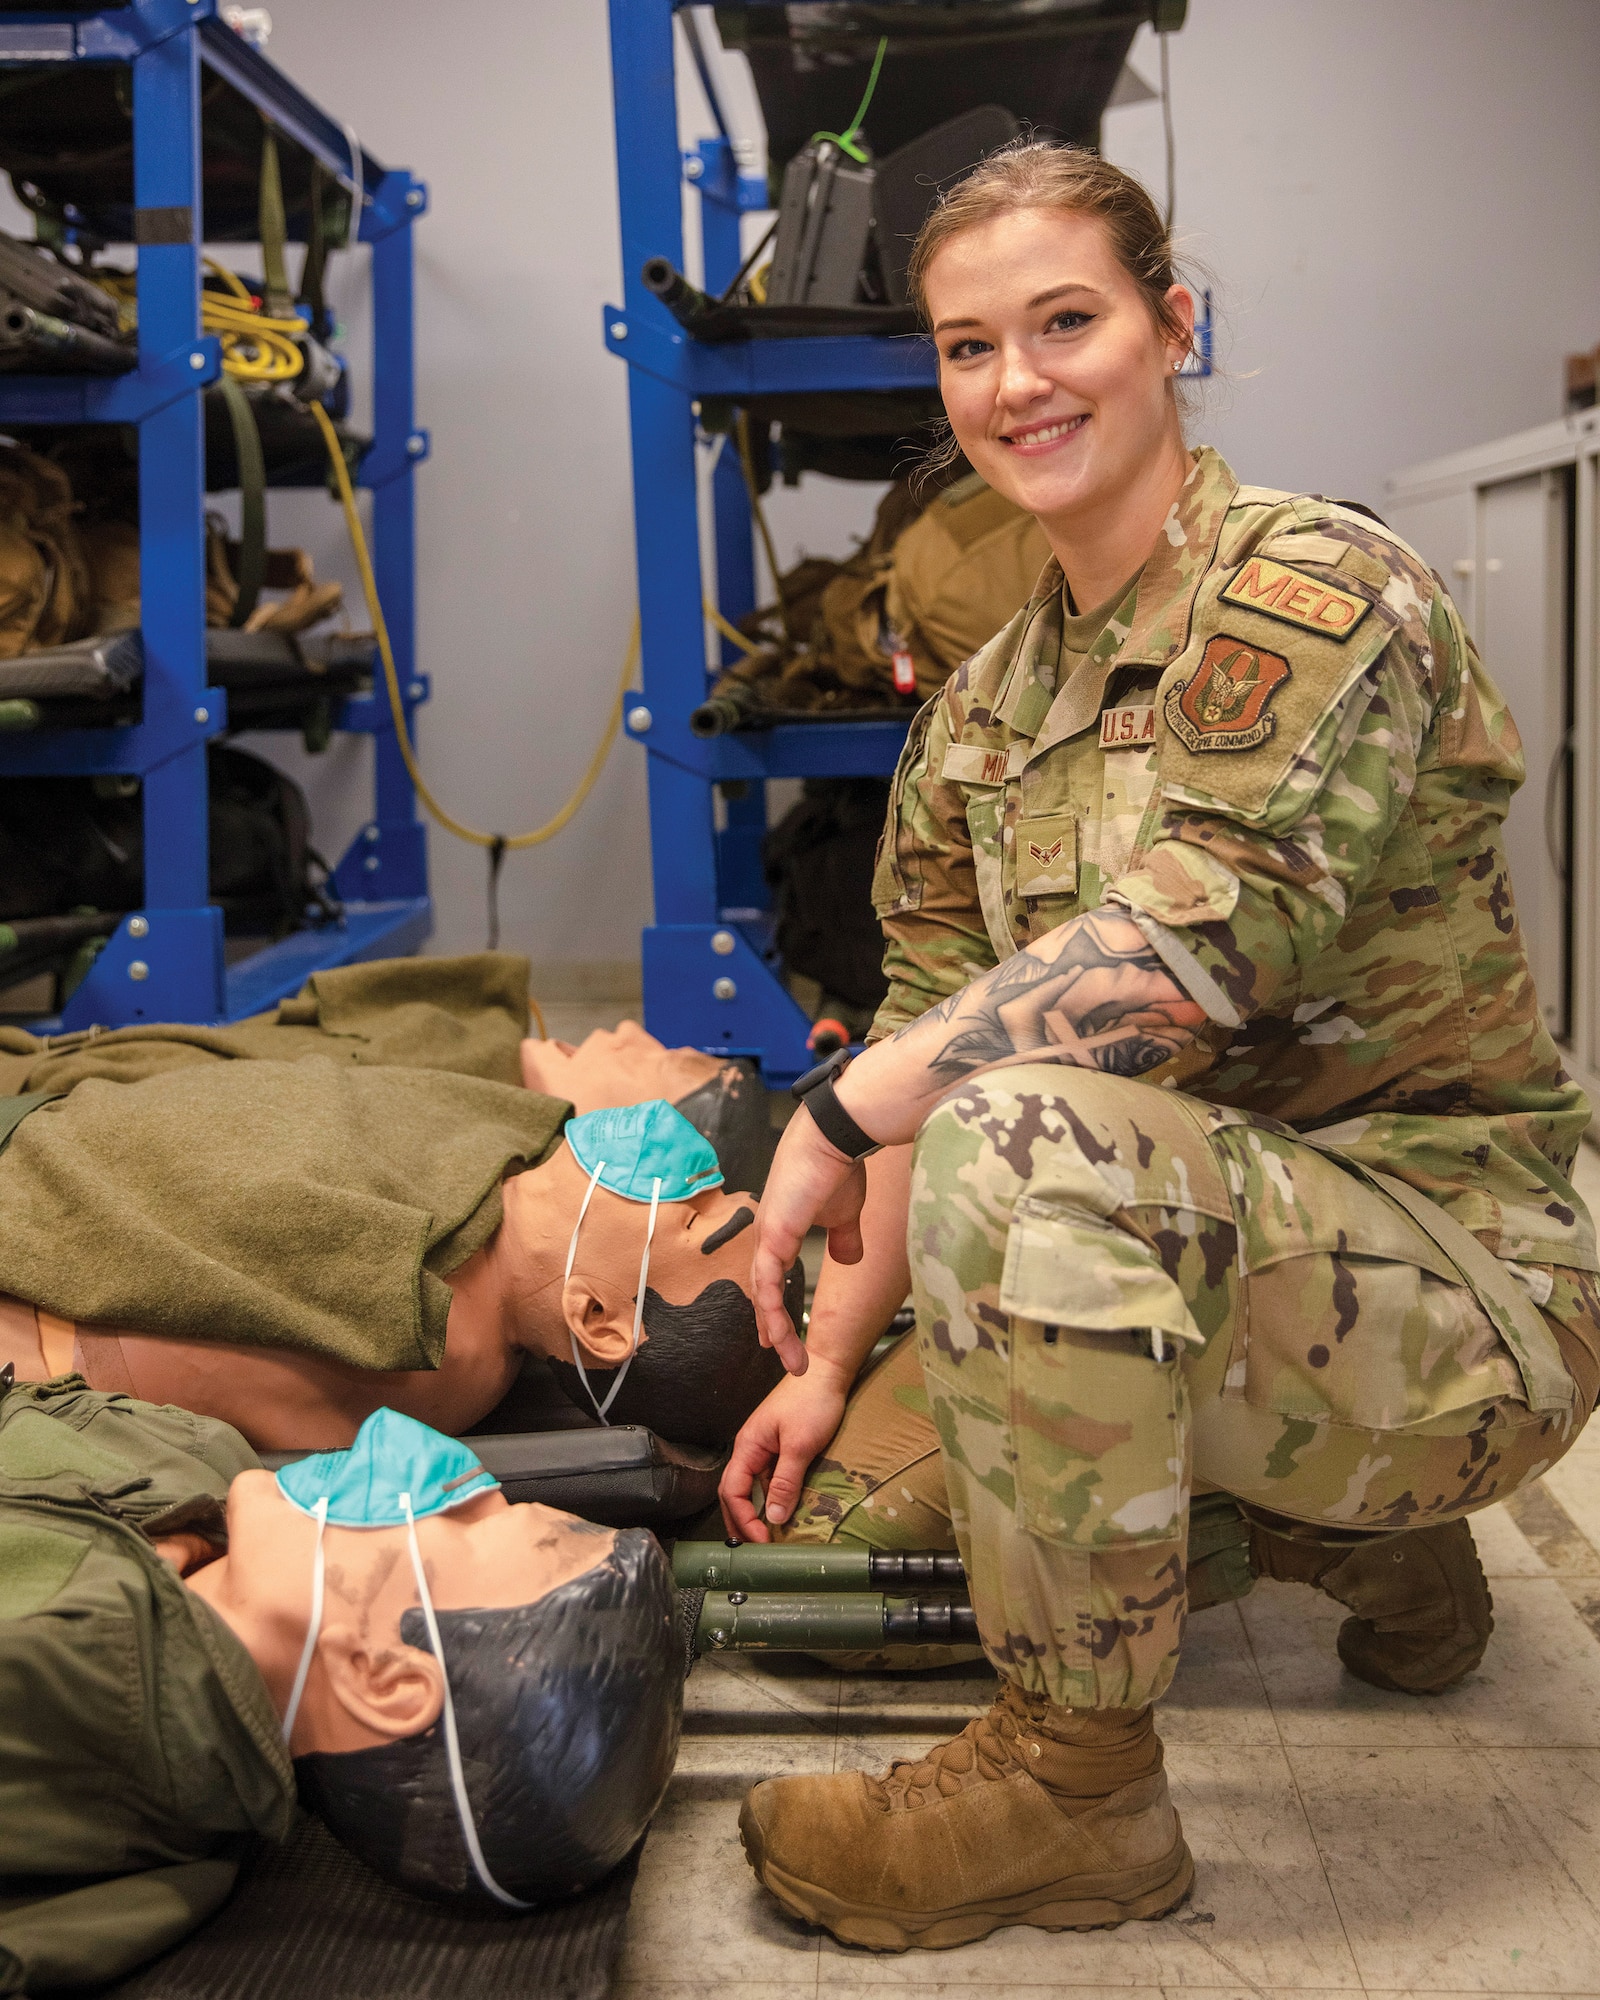 Airman 1st Class Nicole Miller, 445th Aeromedical Evacuation Squadron AE technician, is the 445th Airlift Wing July Spotlight Performer.